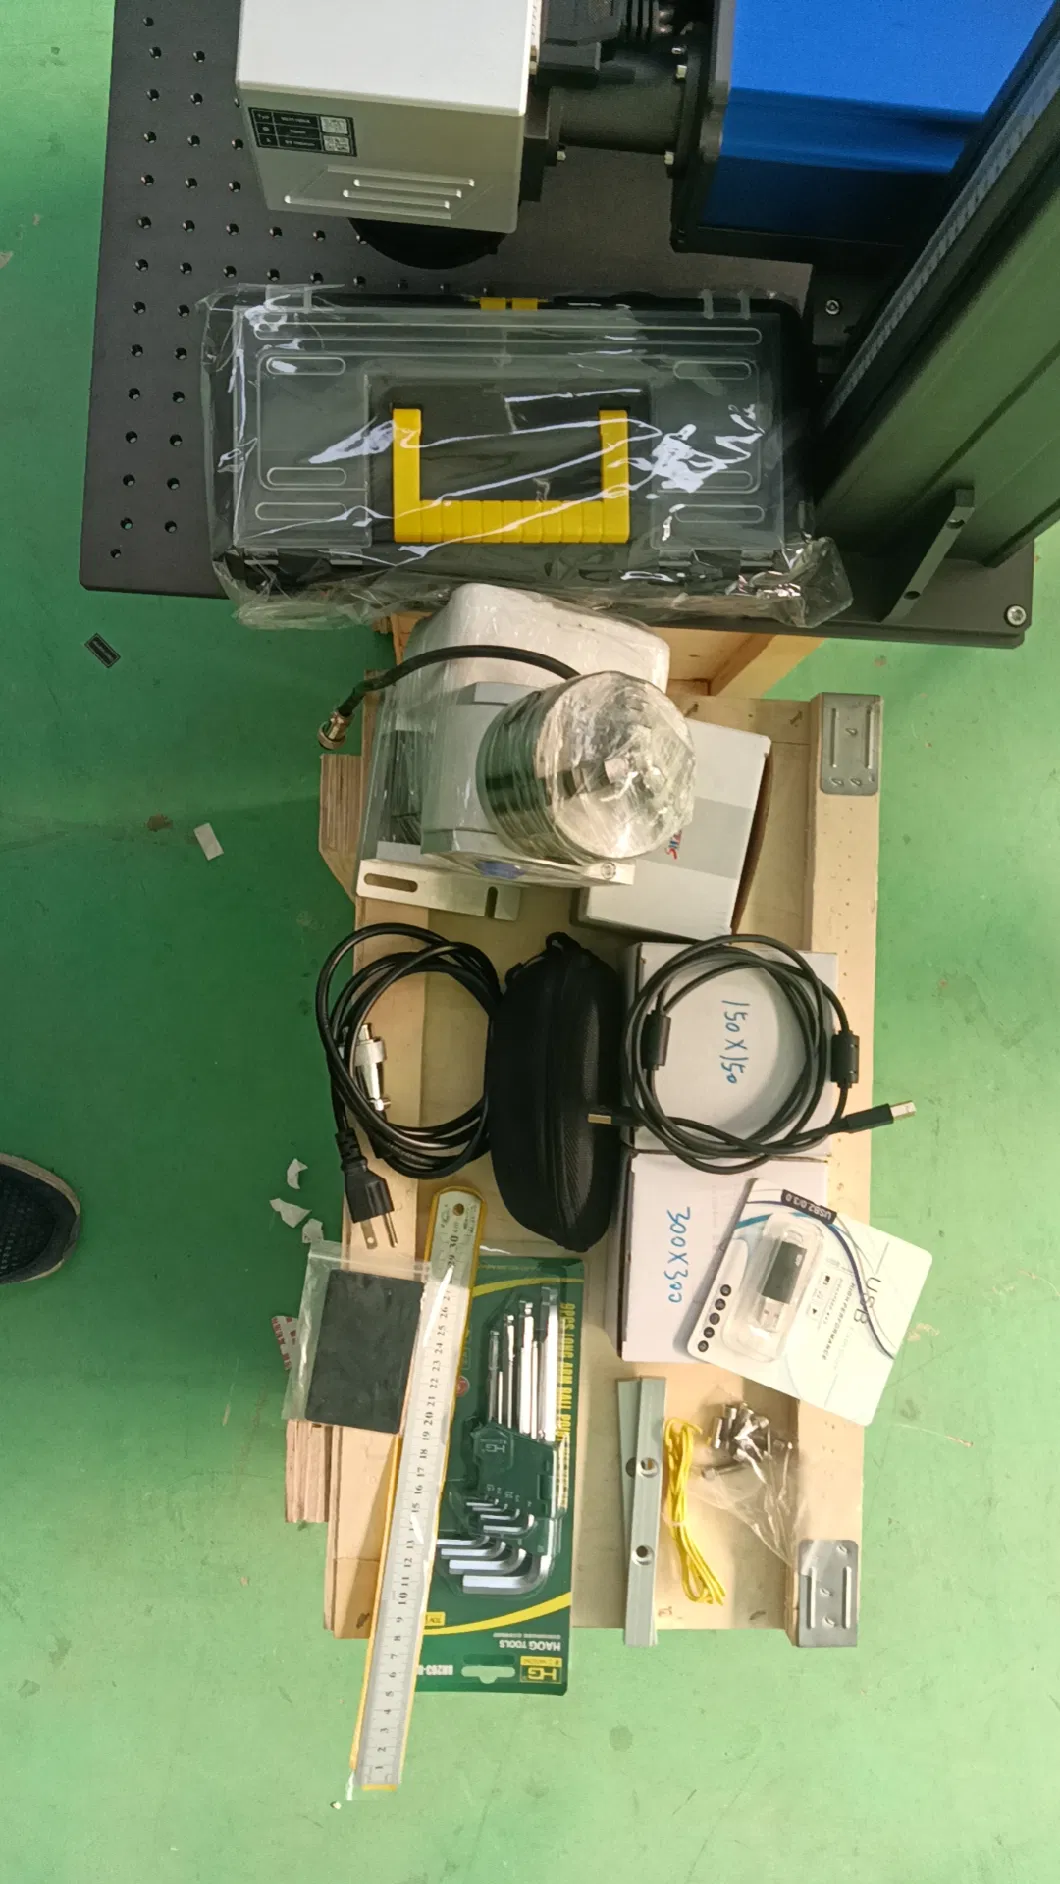 Factory Agent 20W 30W 50W 100W Raycus Fiber Laser Marker and with Jpt Laser Source Rfl-20QS CO2 Galvo Laser Marking Machine